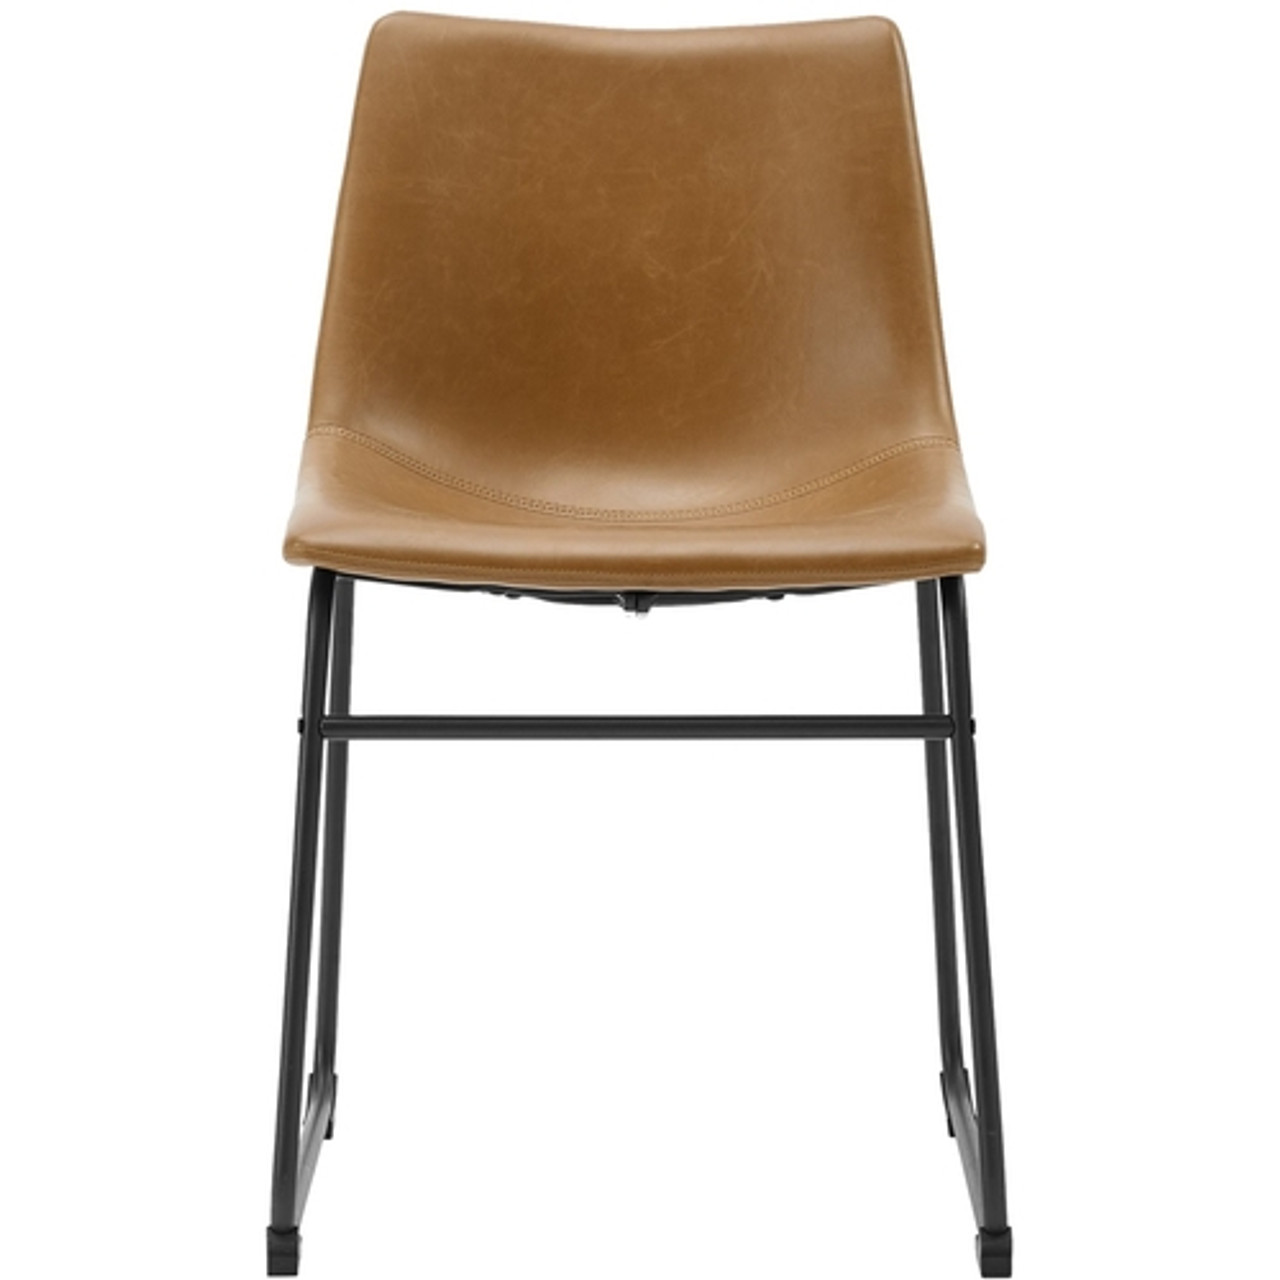 Walker Edison - Industrial Faux Leather Dining Chairs (Set of 2) - Whiskey Brown